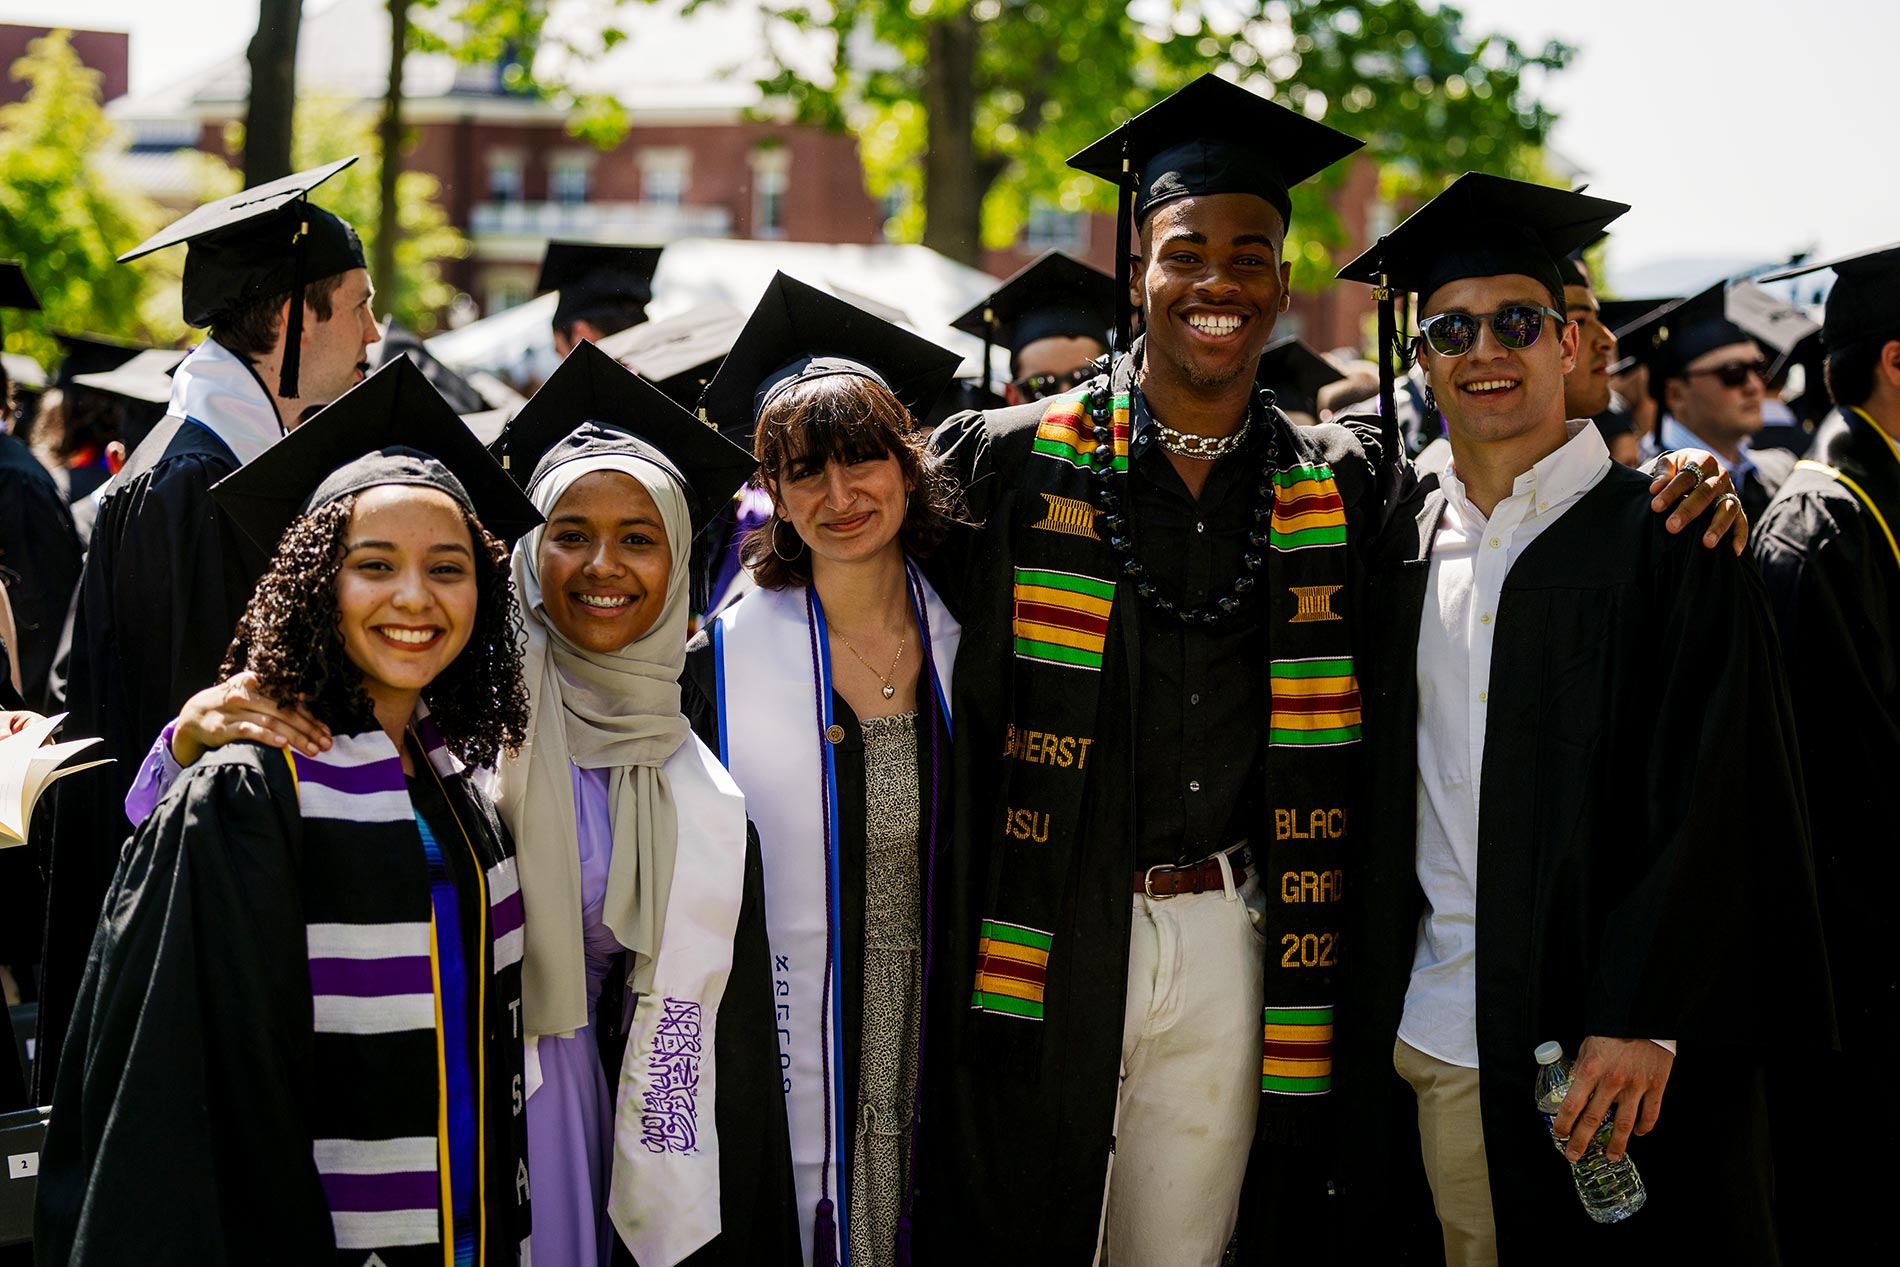 A group of five graduates pose together at the end of the ceremony.